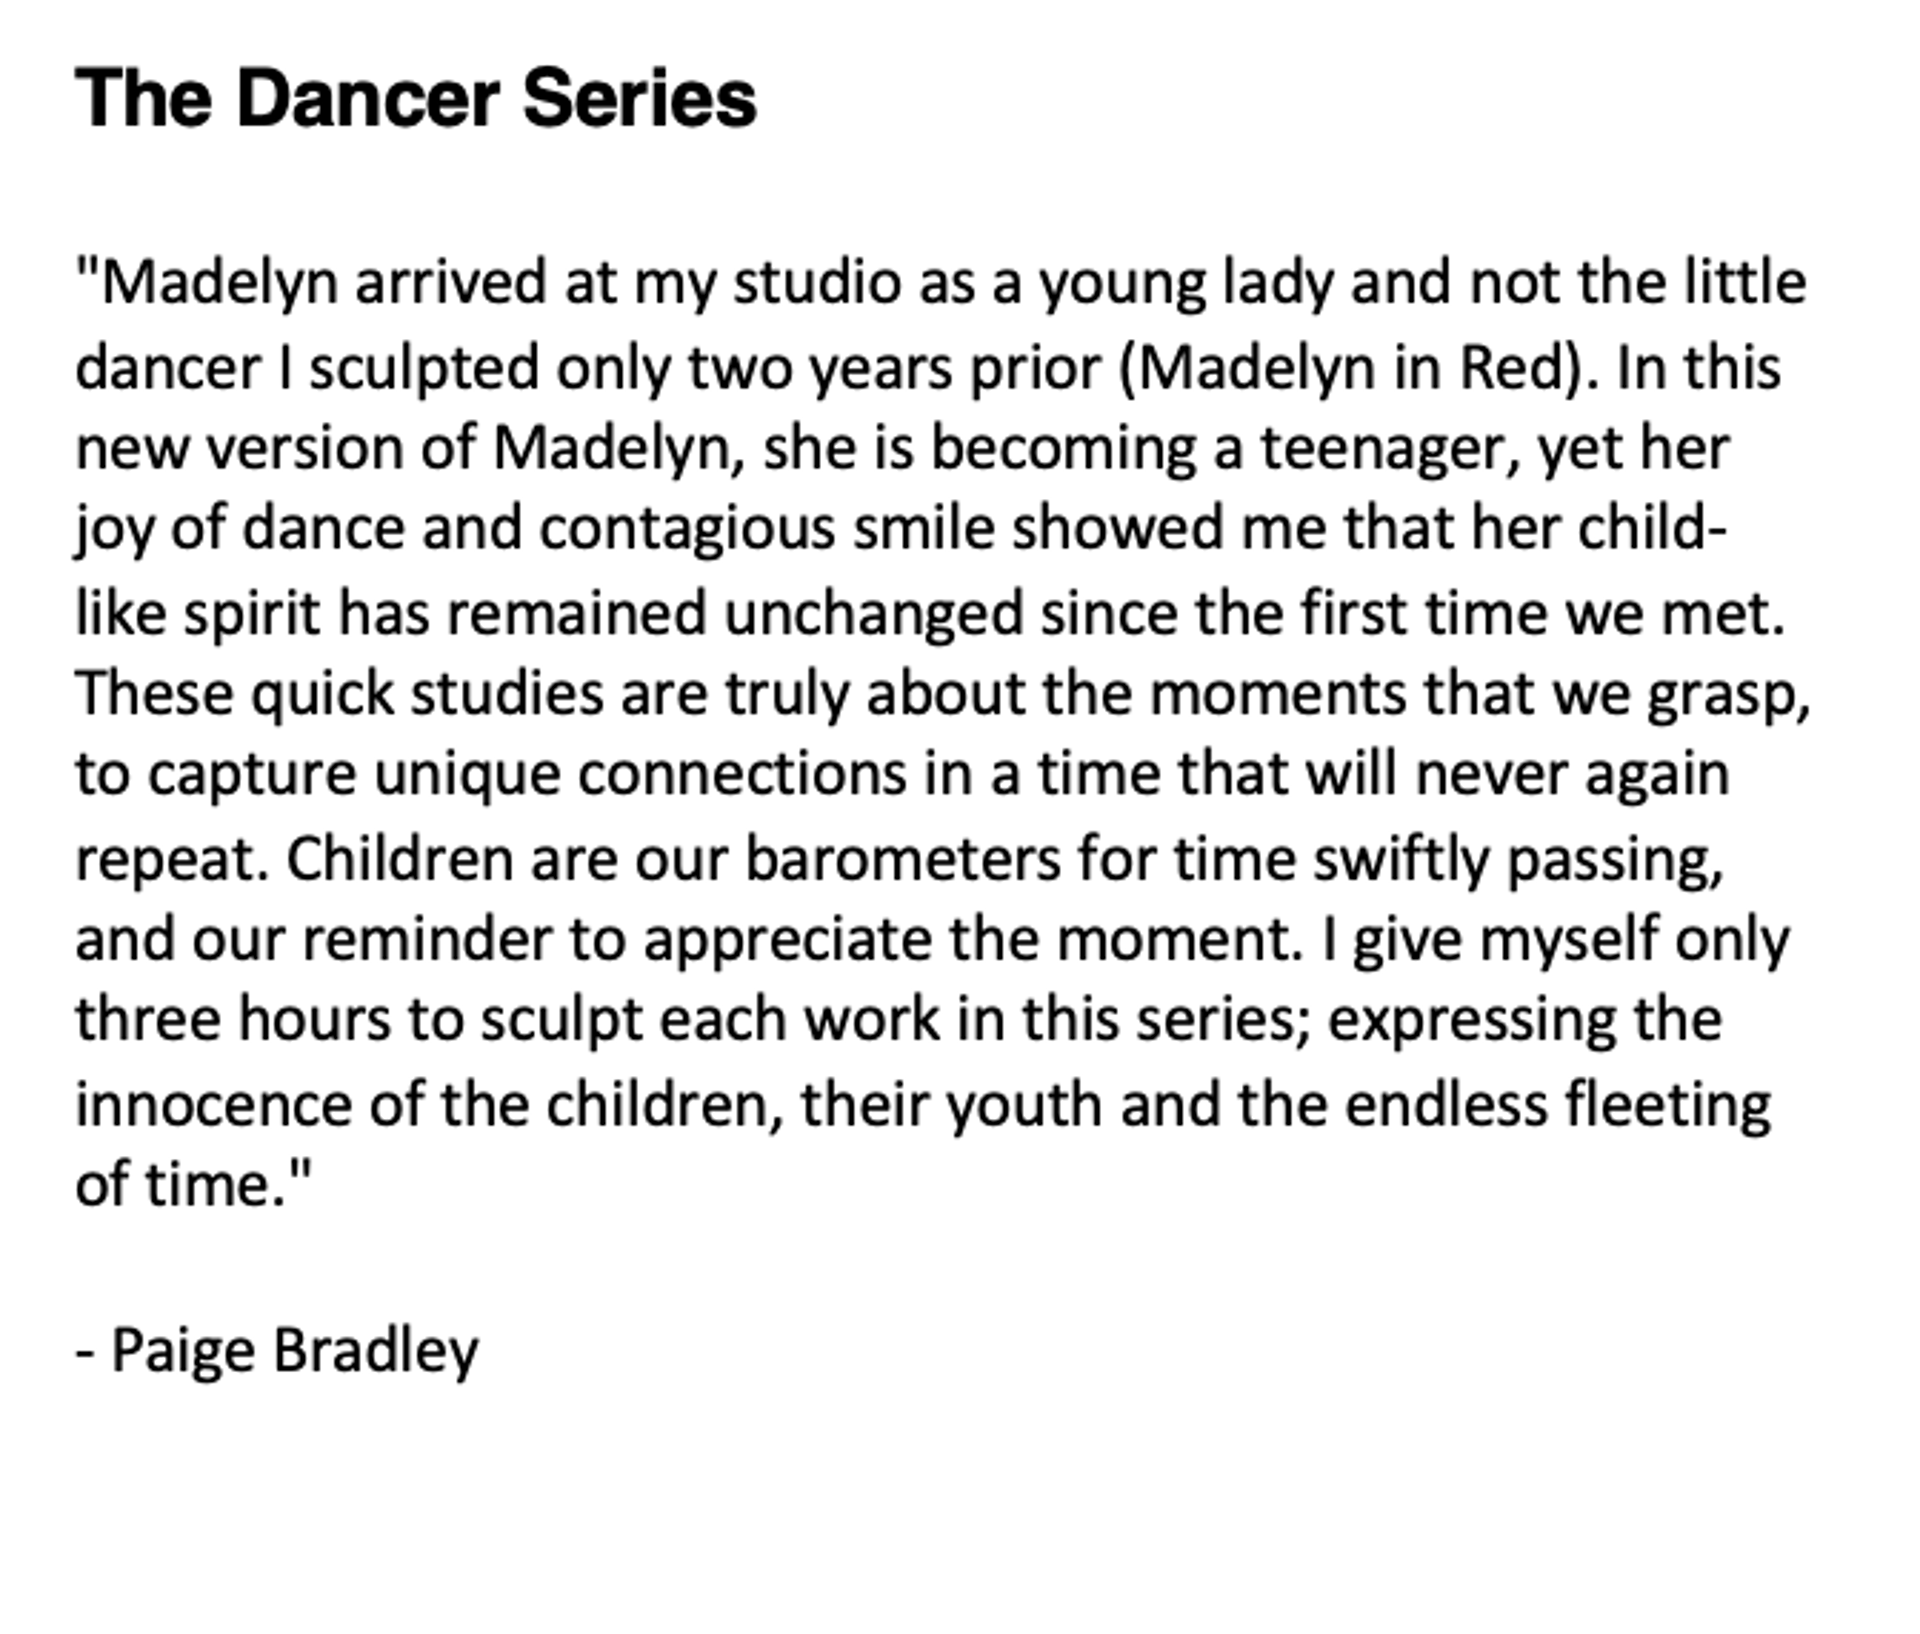 The Dancer Series, "Madelyn in White"